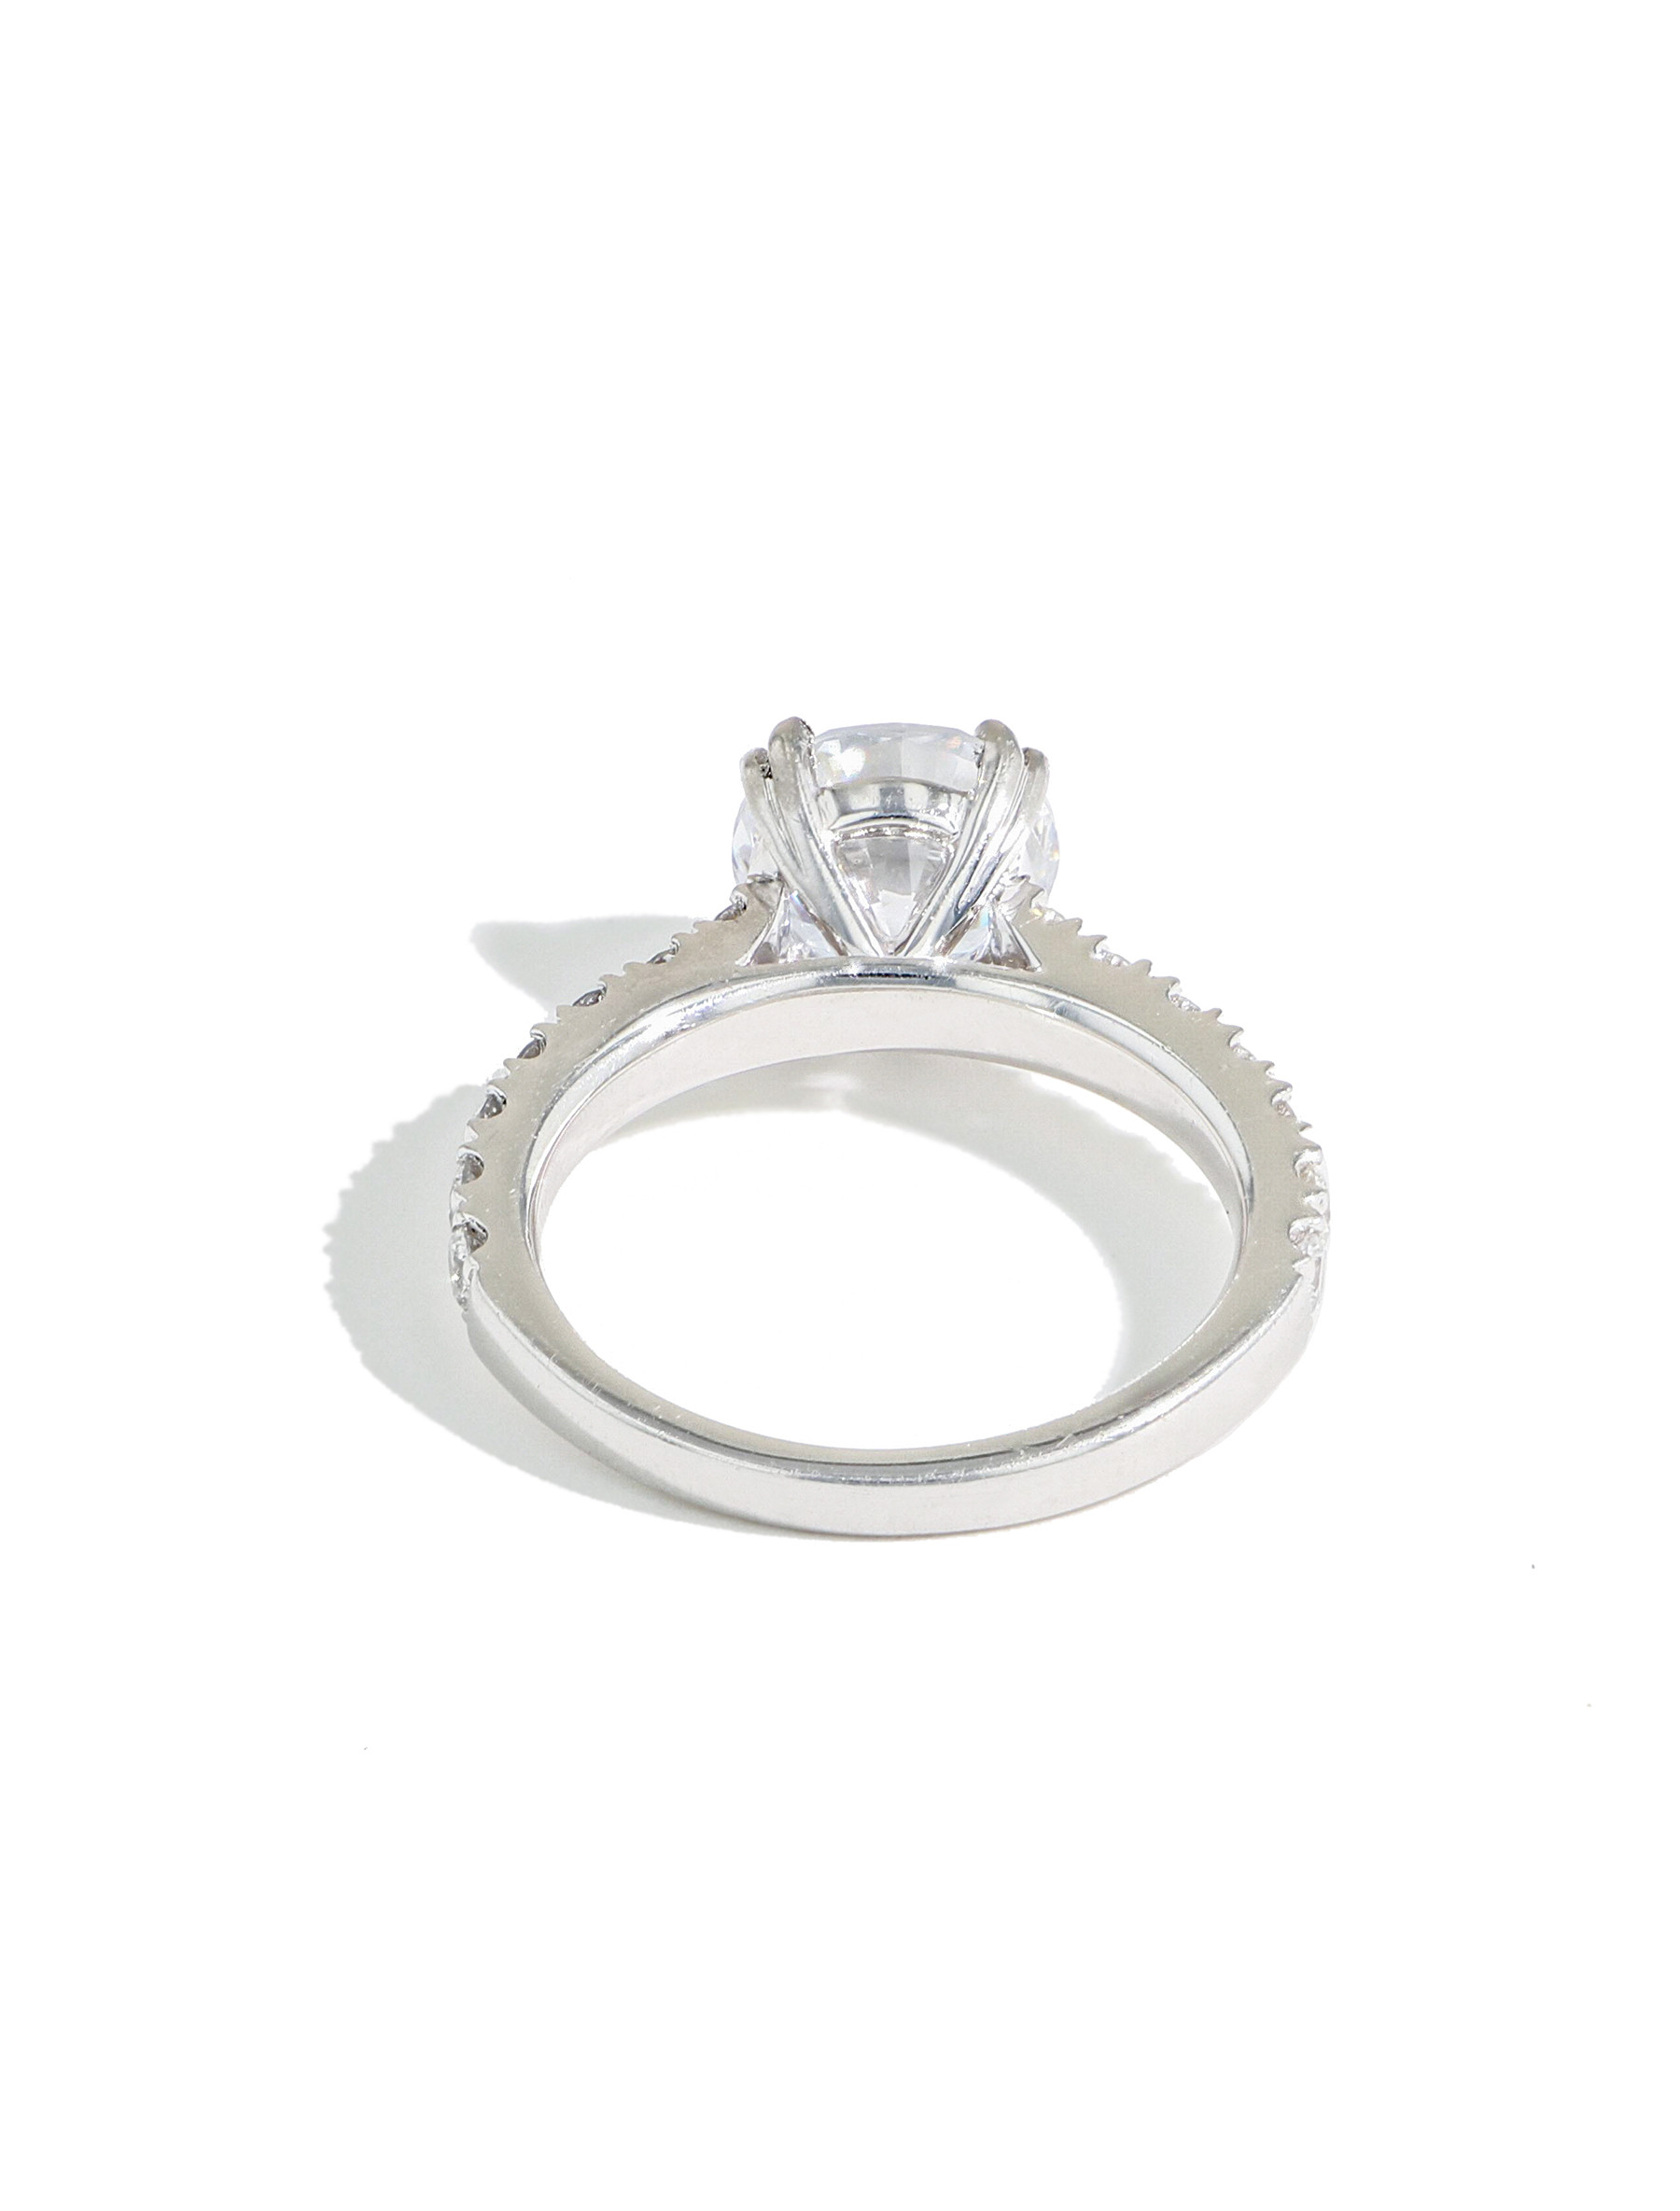 The Round Solitaire Pave Engagement Ring Setting in Platinum back view